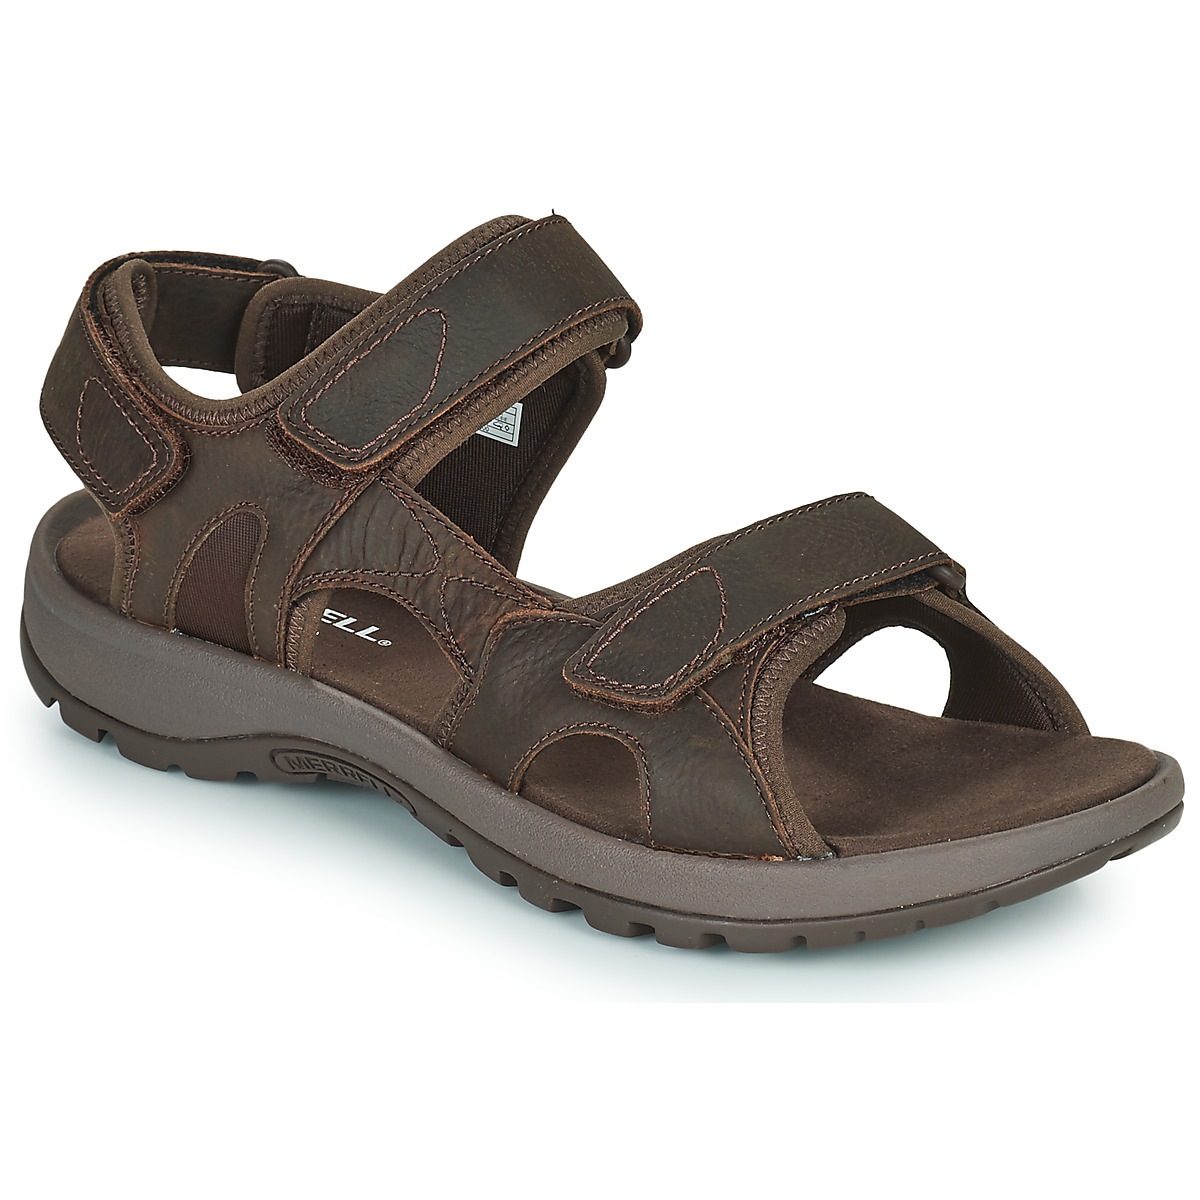 Spartoo Man Sandals in Brown by Merrell GOOFASH